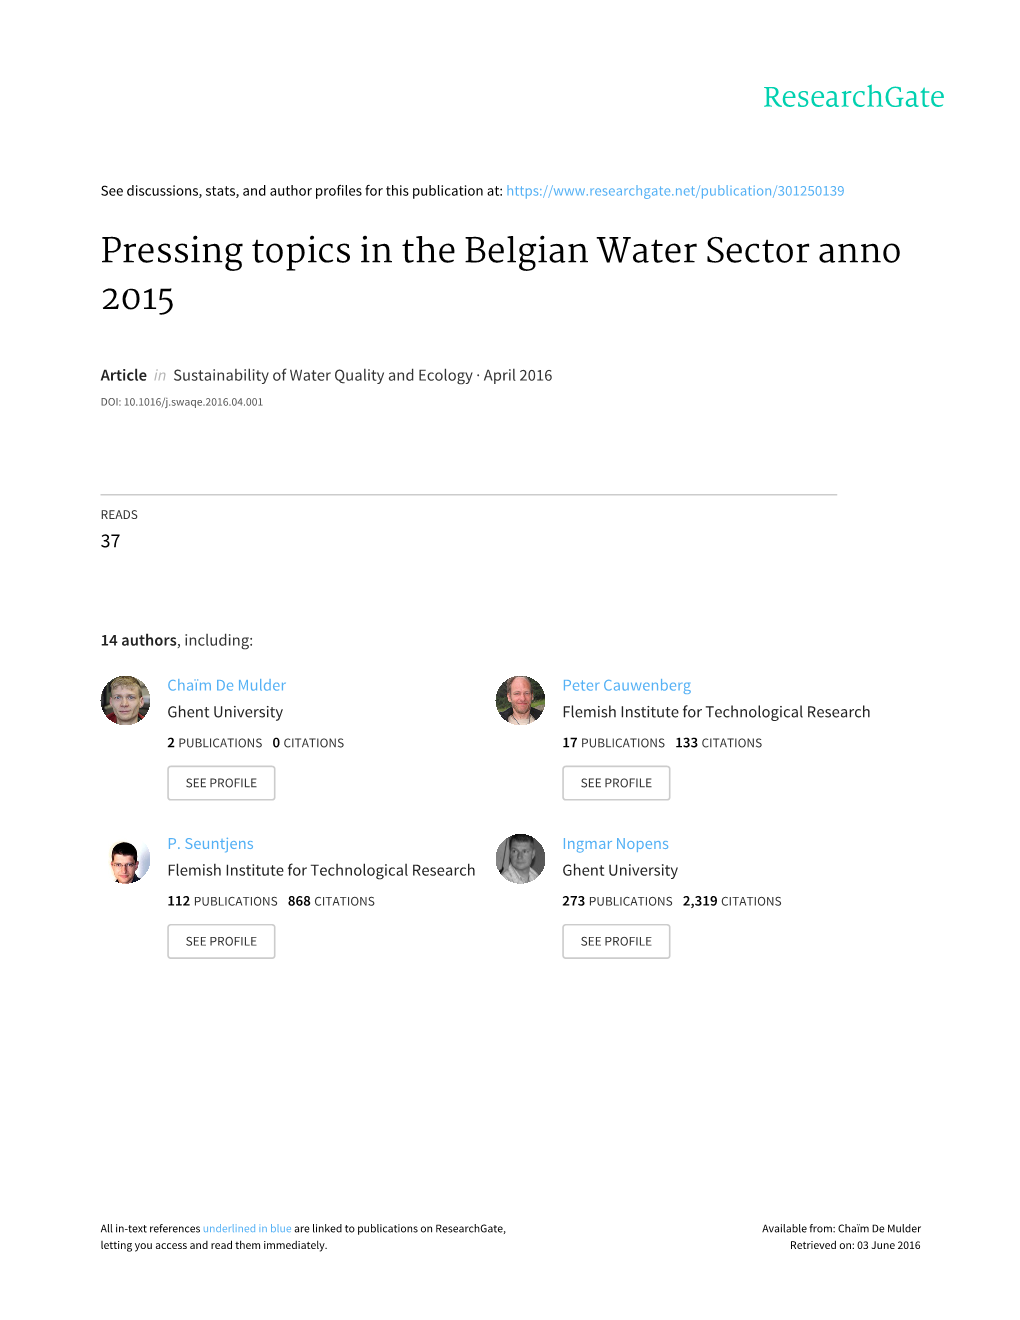 Pressing Topics in the Belgian Water Sector Anno 2015